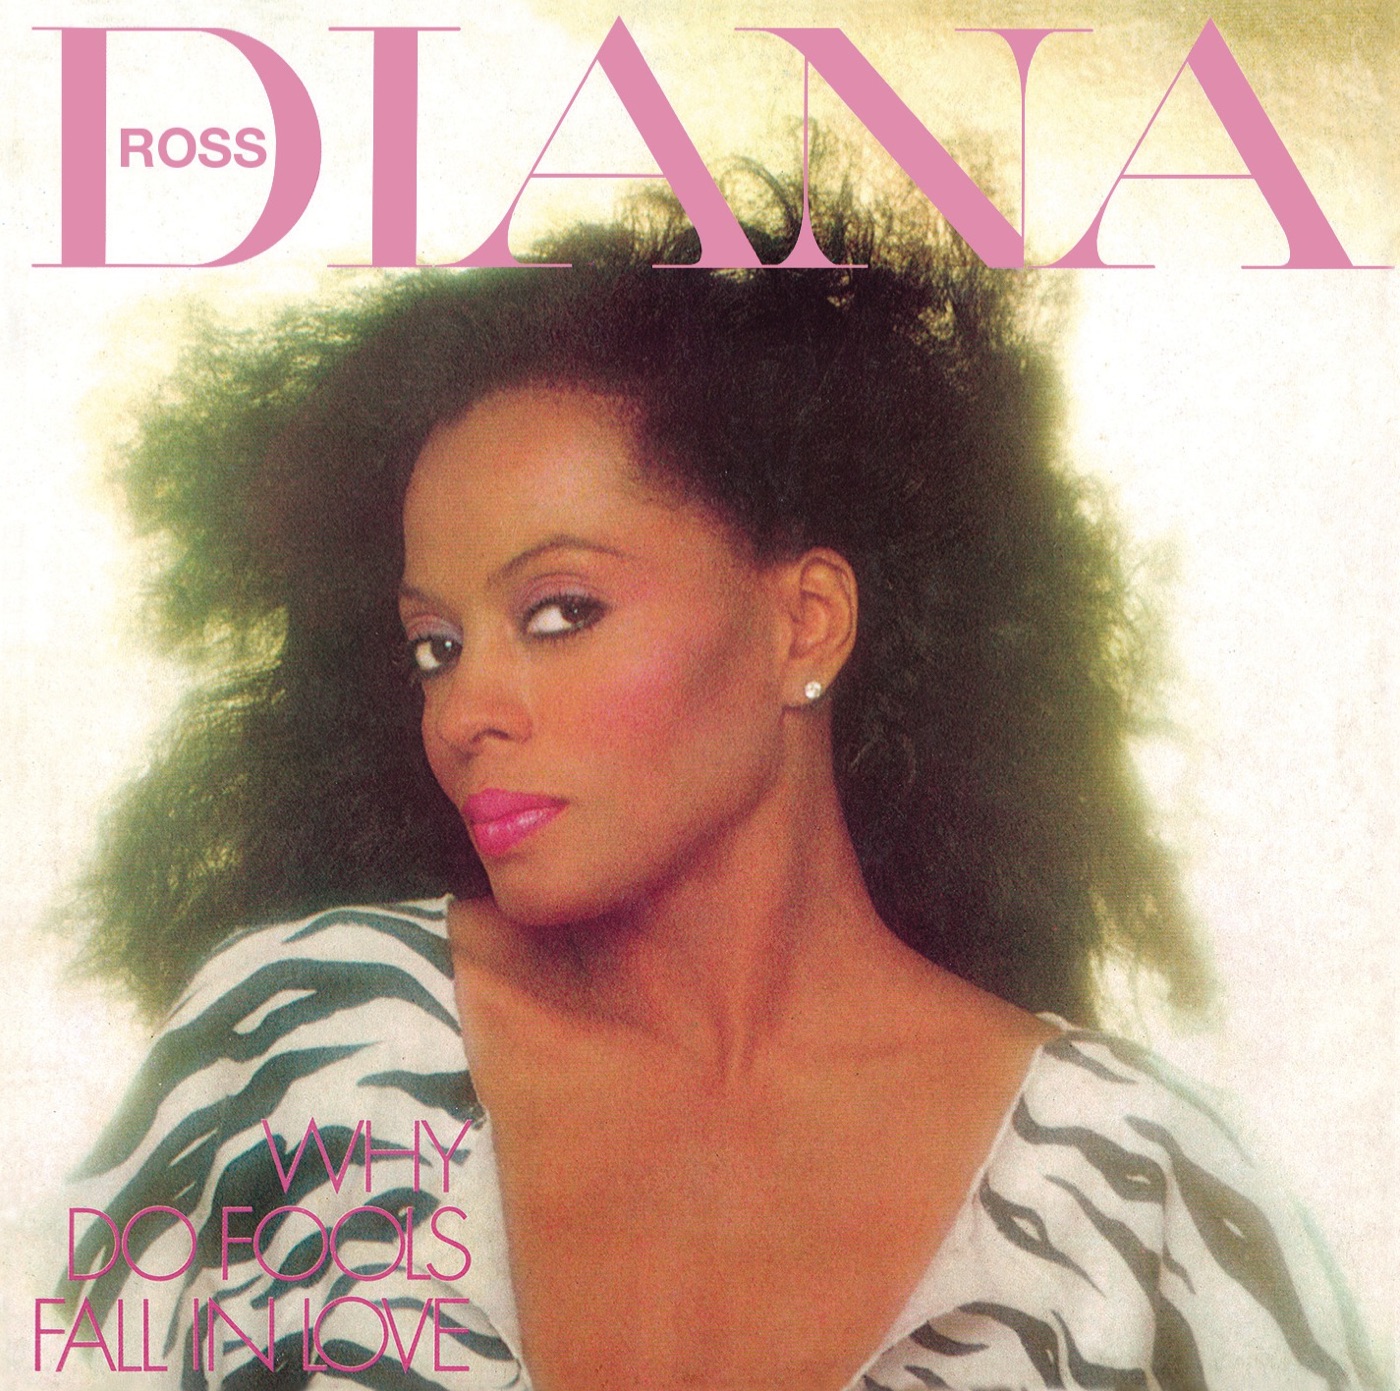 Why Do Fools Fall in Love by Diana Ross